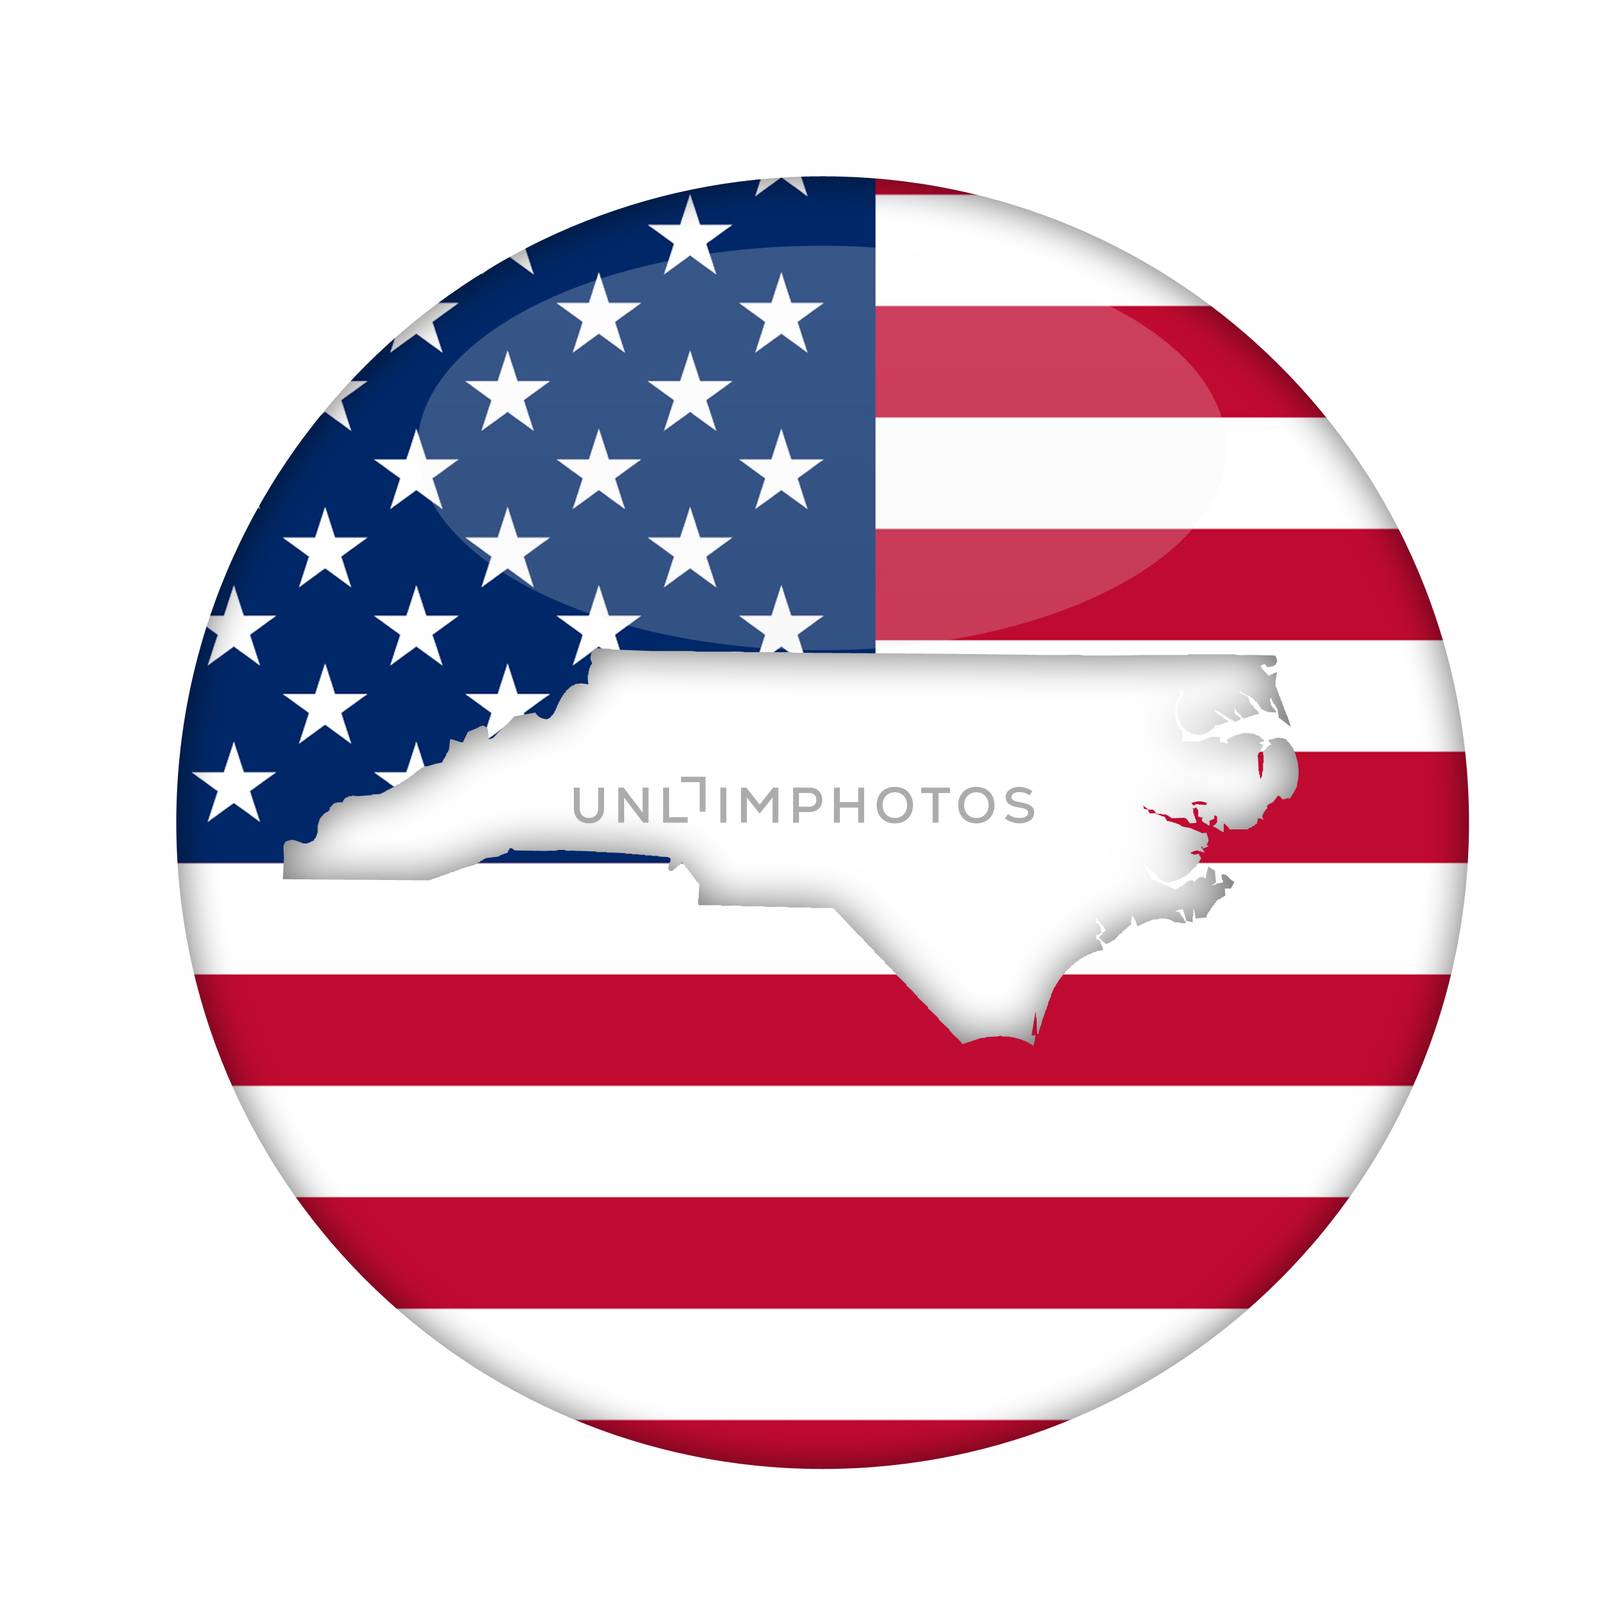 North Carolina state of America badge isolated on a white background.